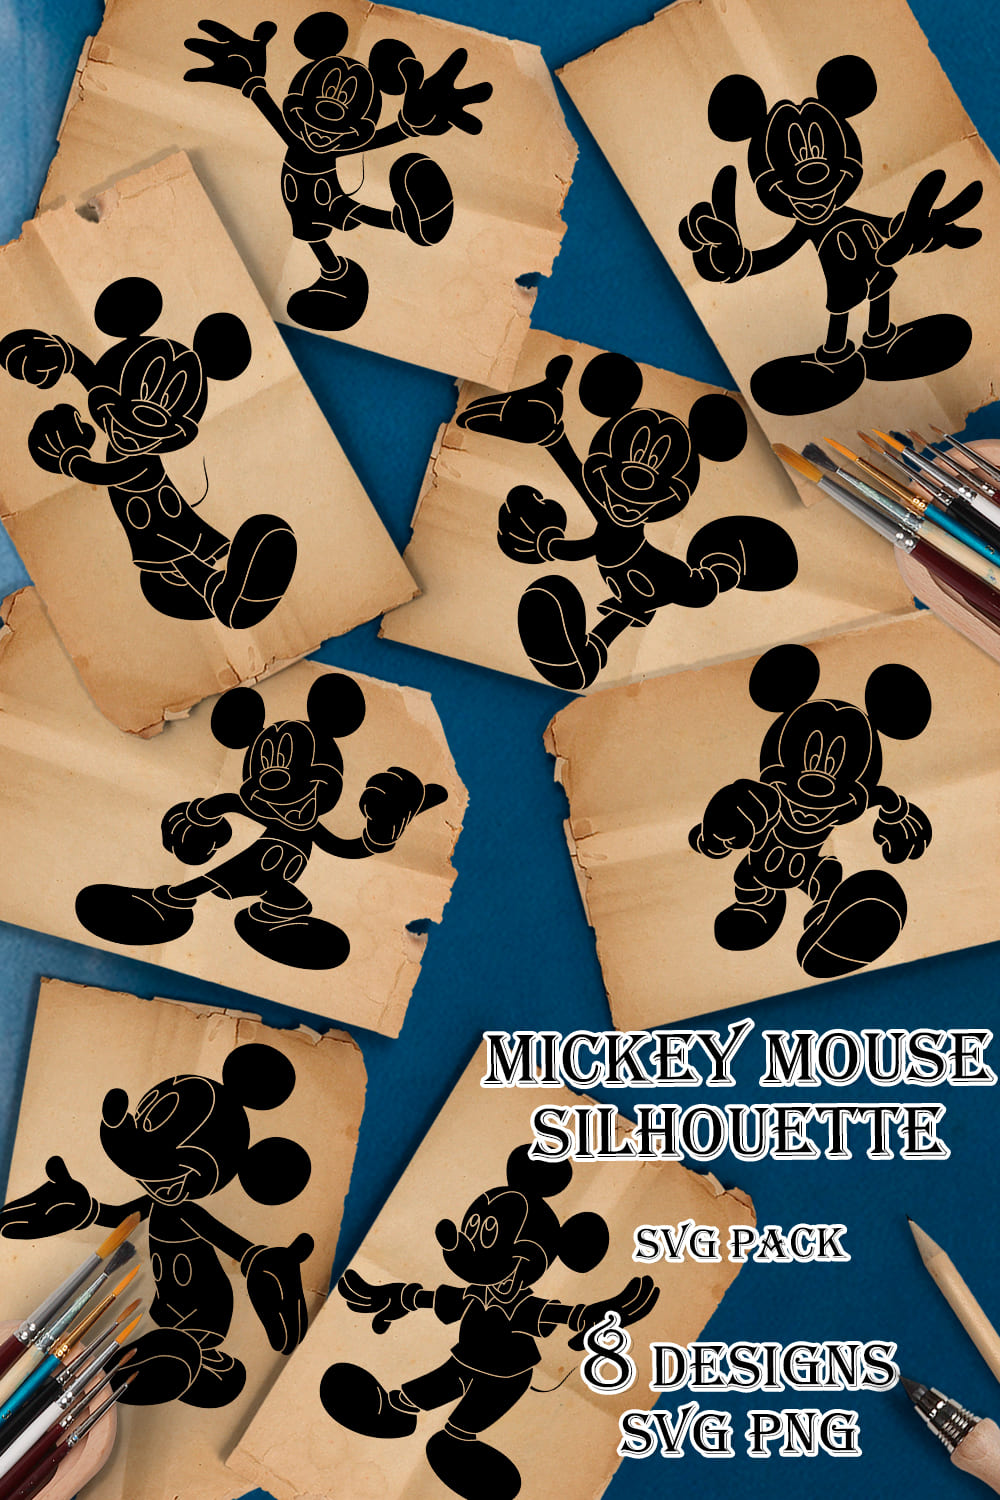 Mickey Mouse Silhouette SVG - pinterest image preiew.